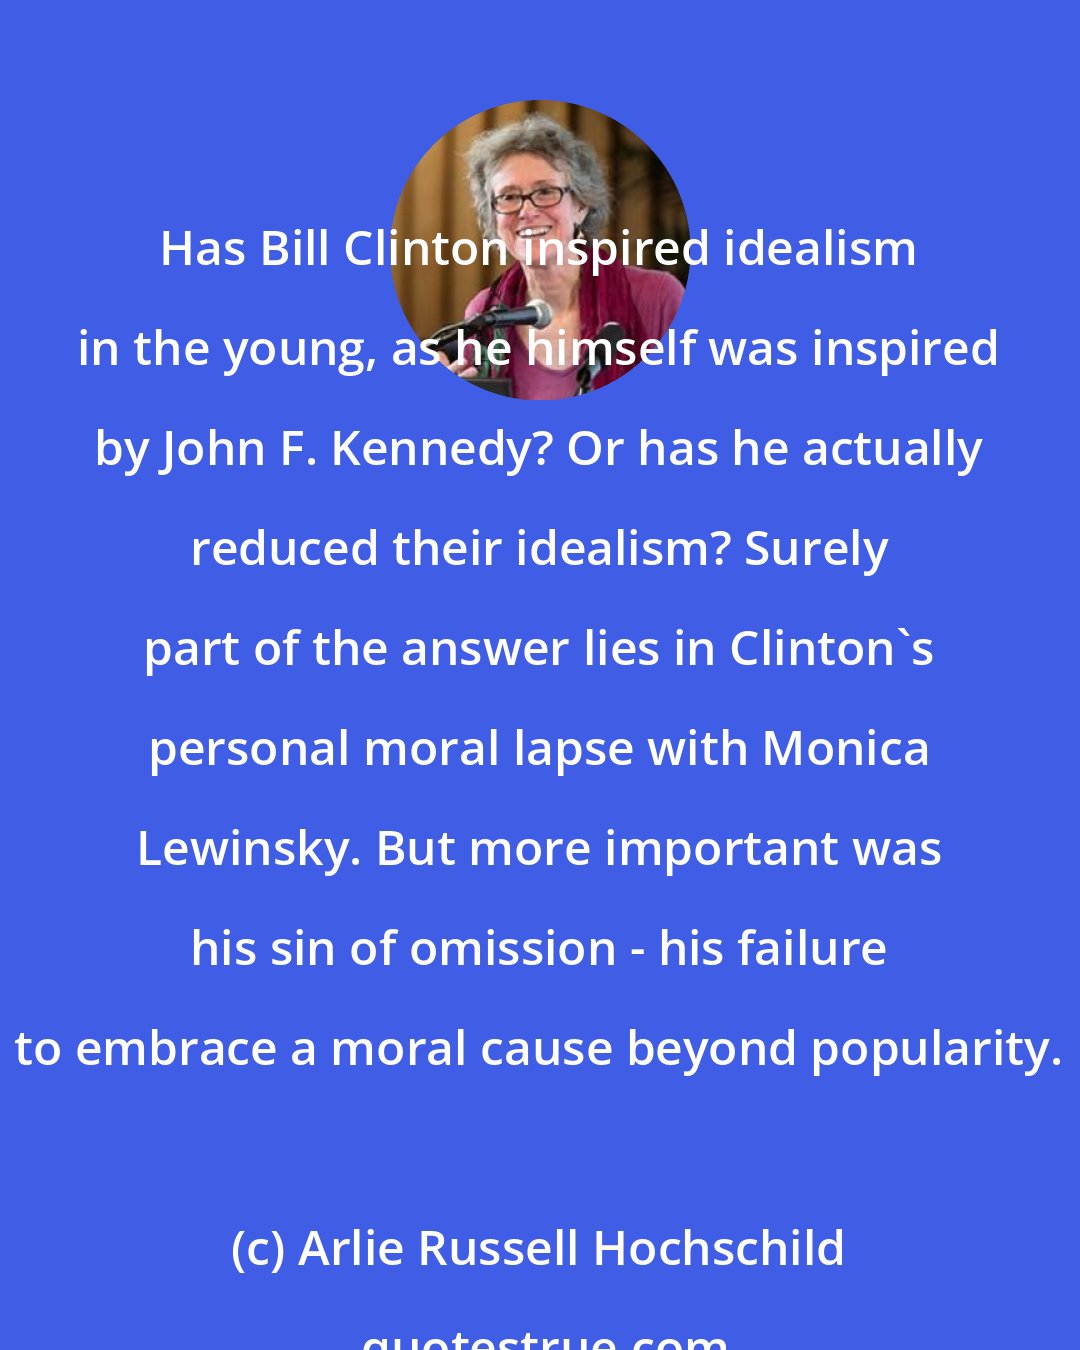 Arlie Russell Hochschild: Has Bill Clinton inspired idealism in the young, as he himself was inspired by John F. Kennedy? Or has he actually reduced their idealism? Surely part of the answer lies in Clinton's personal moral lapse with Monica Lewinsky. But more important was his sin of omission - his failure to embrace a moral cause beyond popularity.